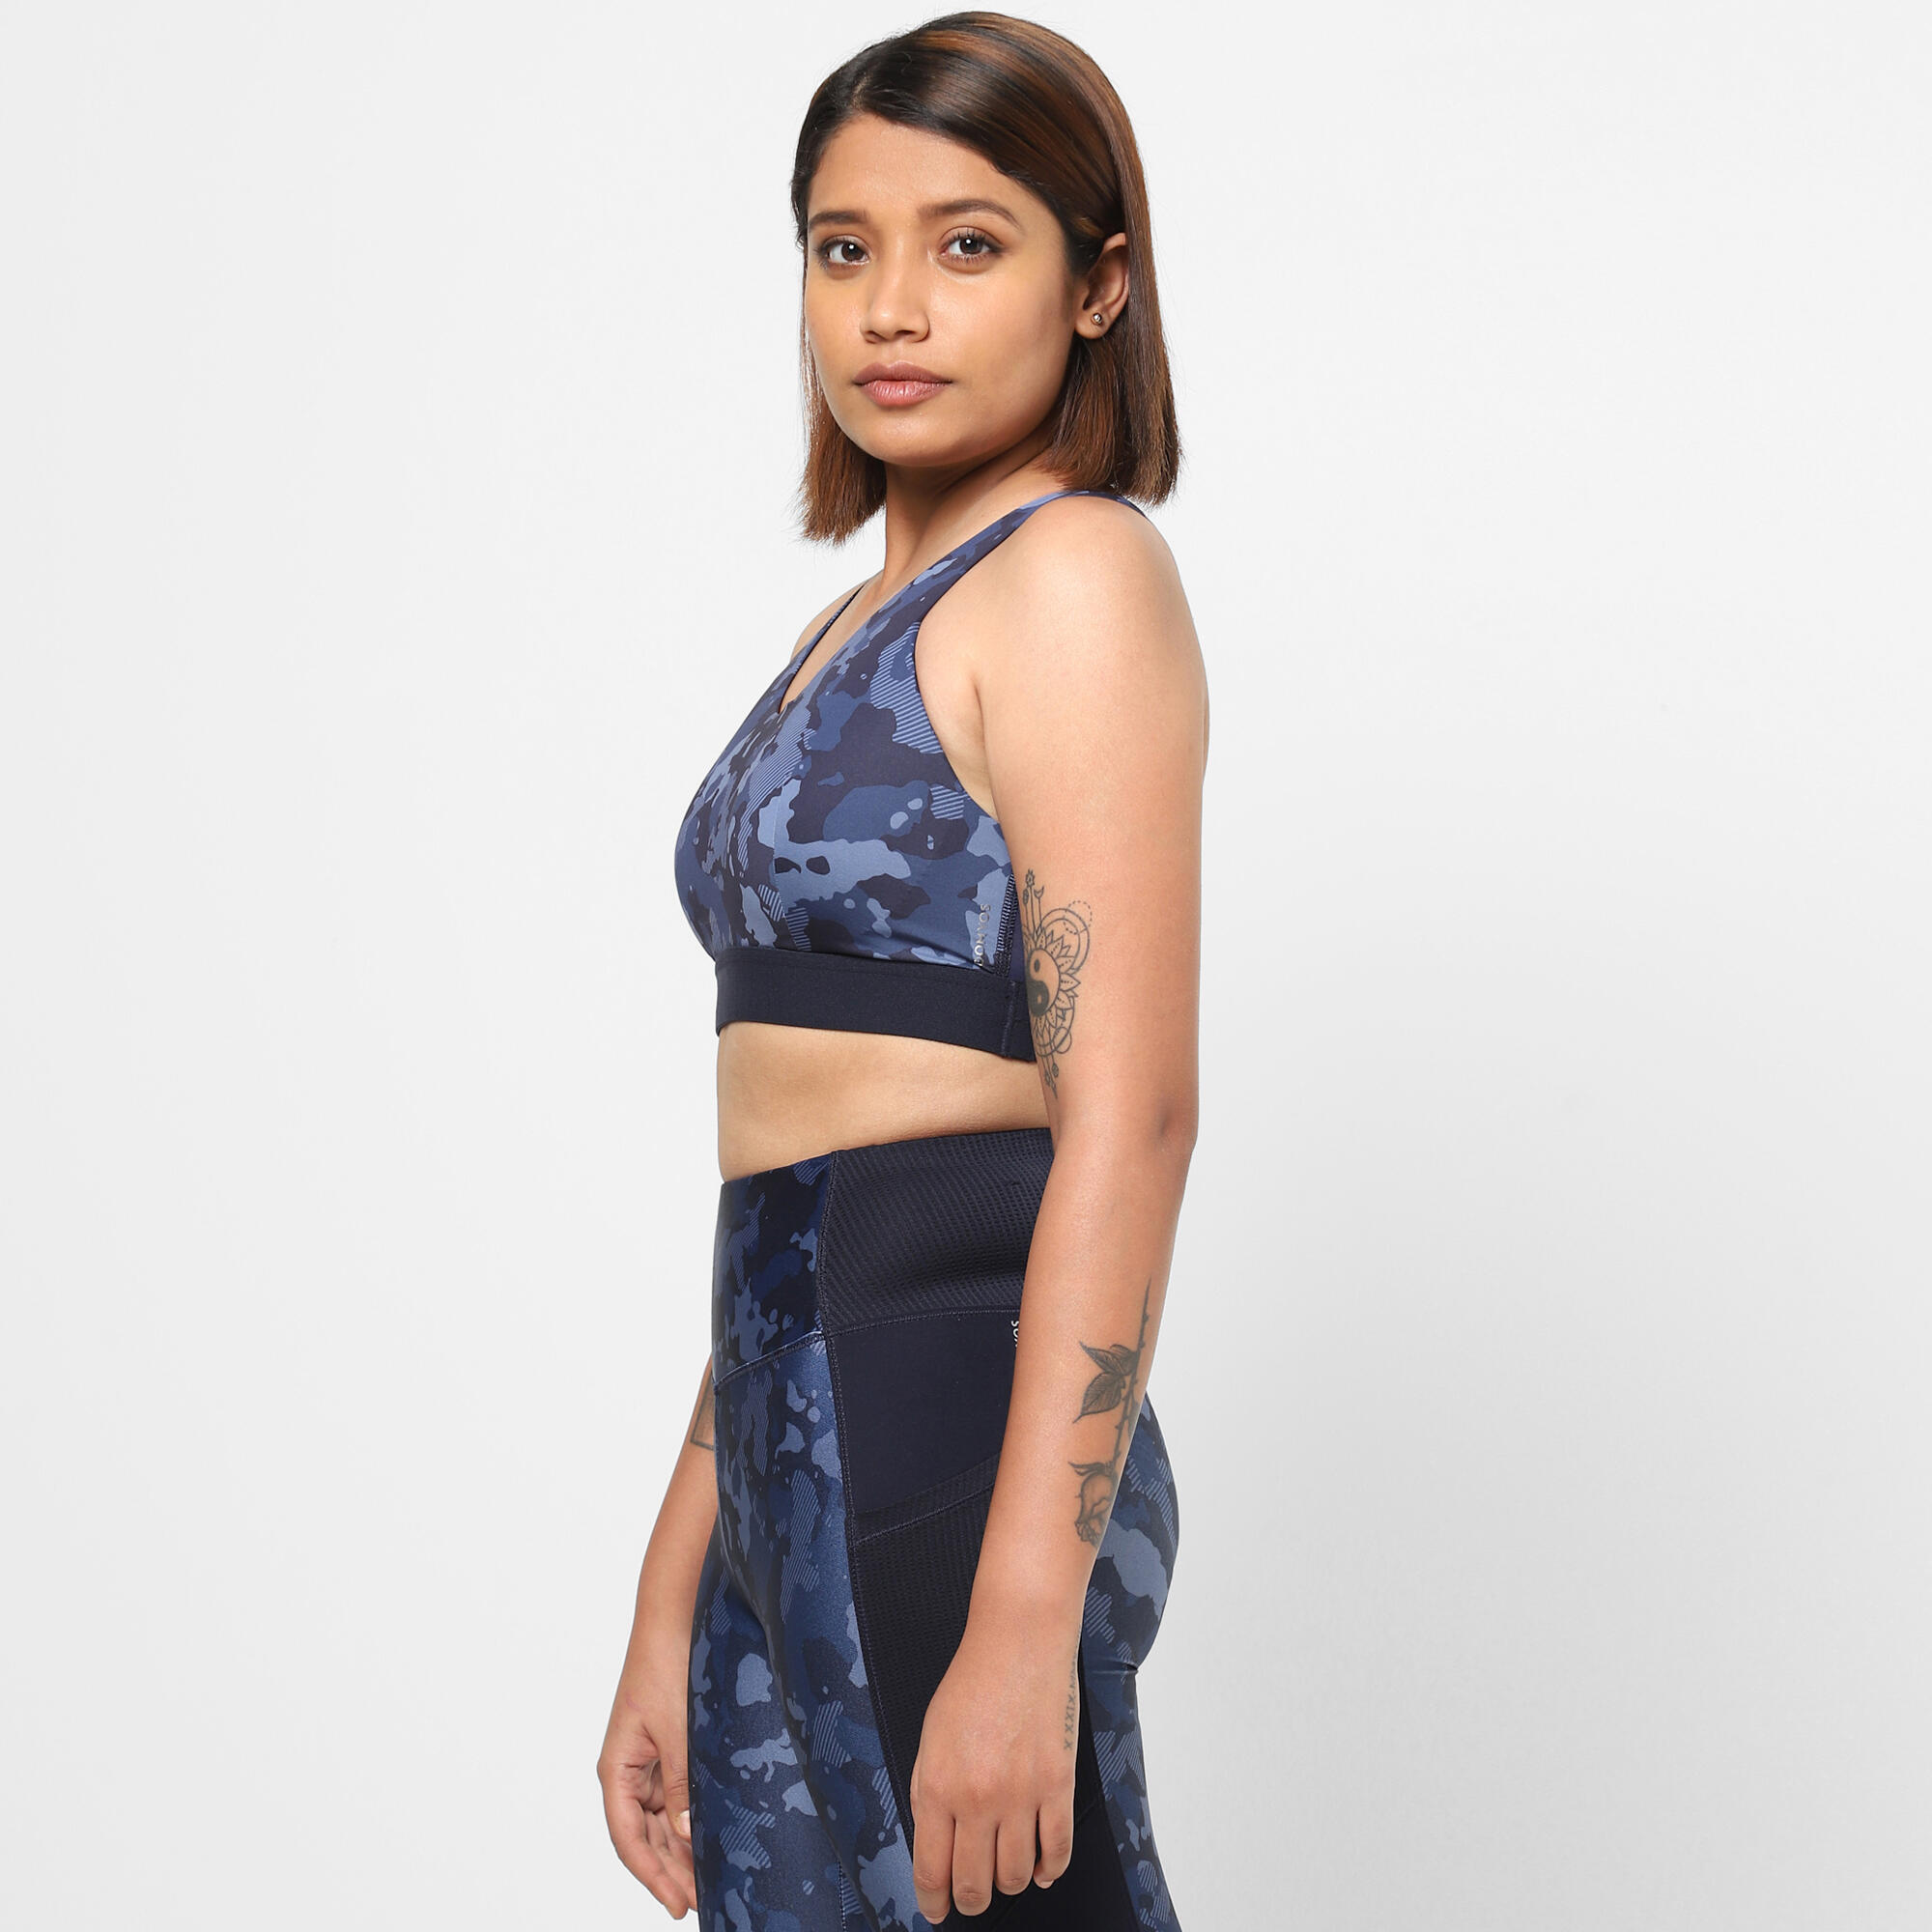 Domyos By Decathlon Blue & Red Graphic Workout Bra Full Coverage - Heavily  Padded Price in India, Full Specifications & Offers